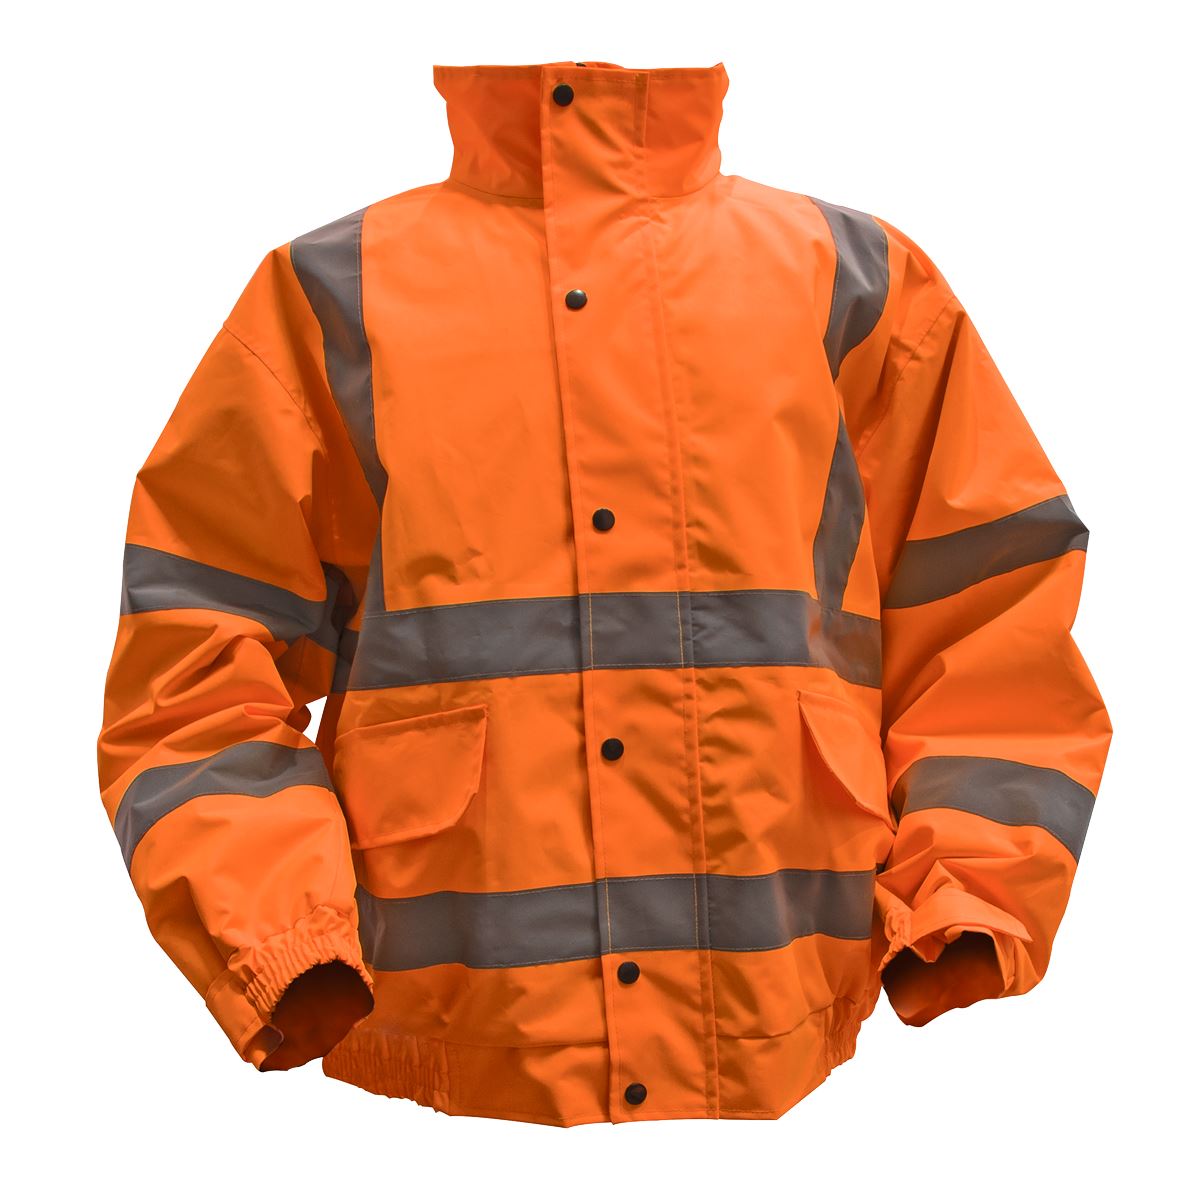 Worksafe by Sealey Hi-Vis Orange Jacket with Quilted Lining & Elasticated Waist - Large